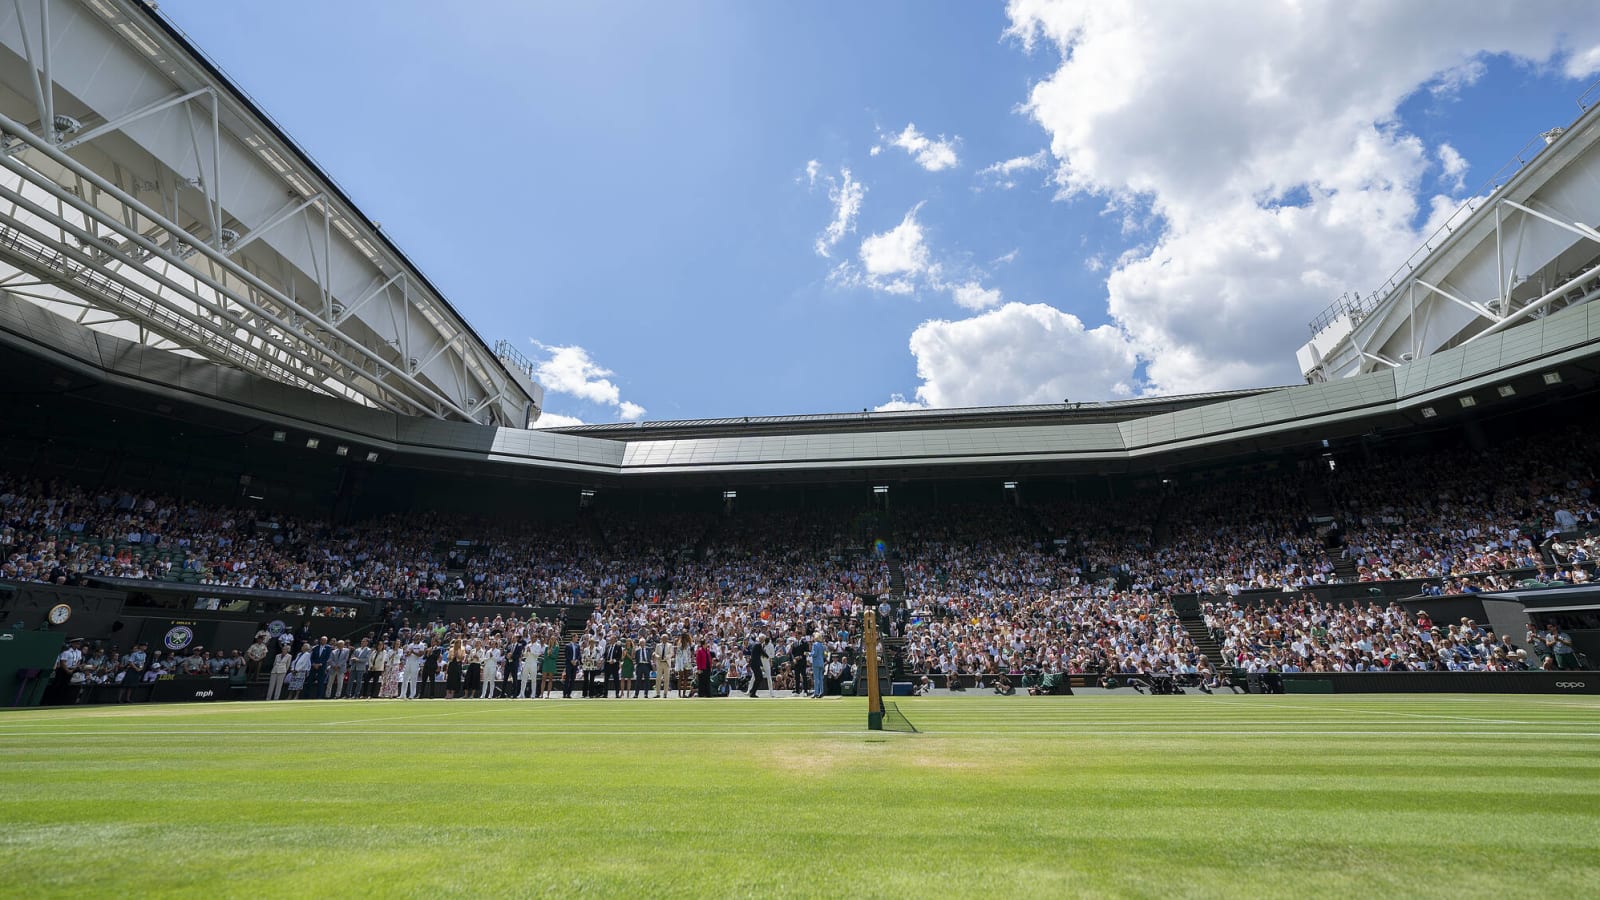 Three Wimbledon security guards arrested over alleged fight